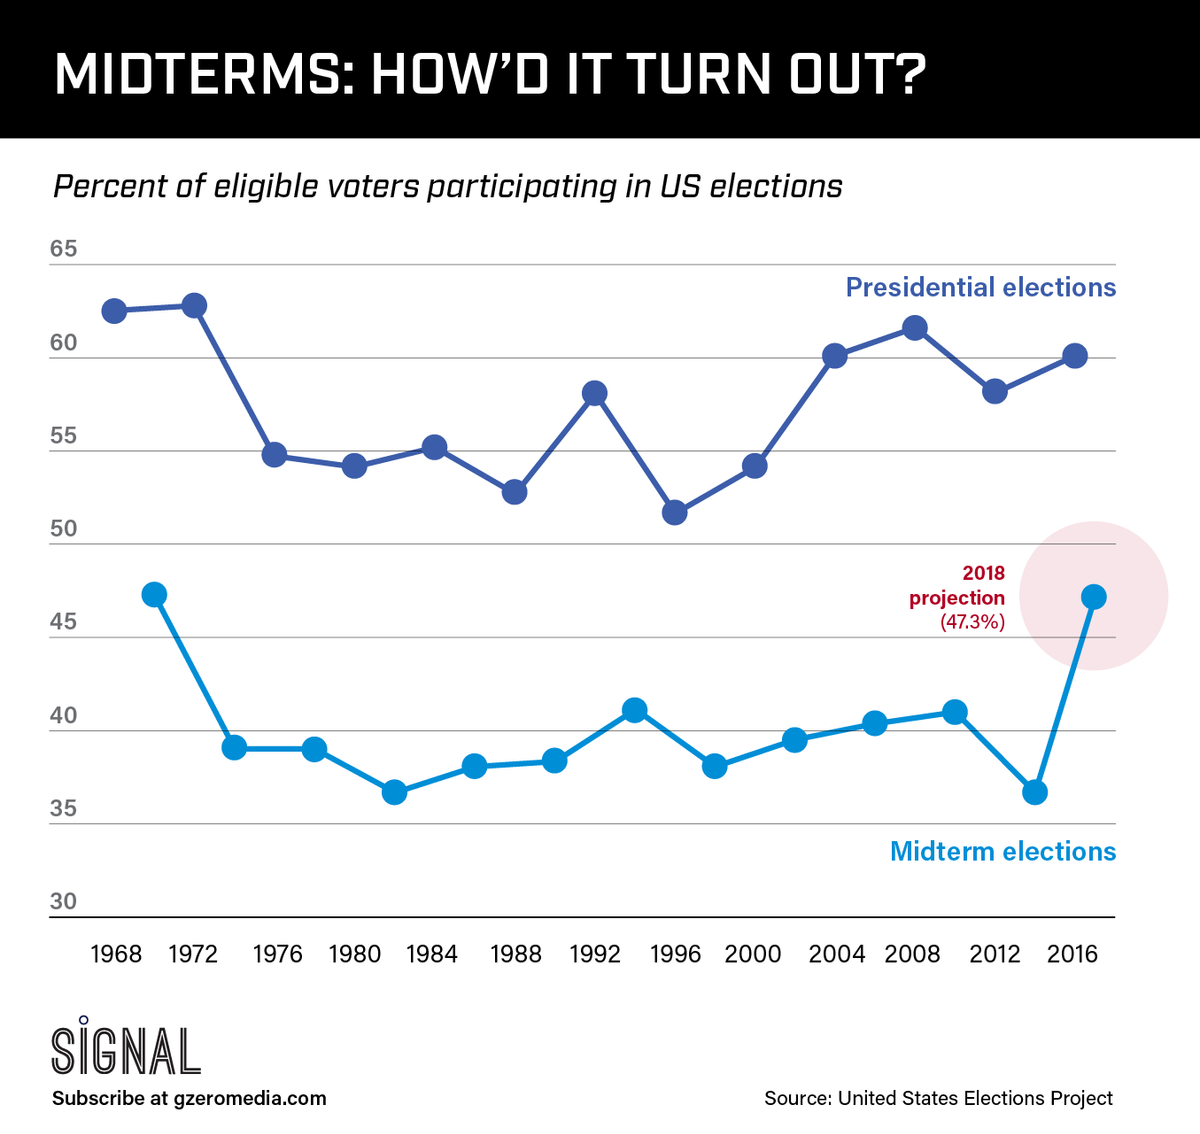 GRAPHIC TRUTH: MIDTERMS – HOW’D IT TURN OUT?